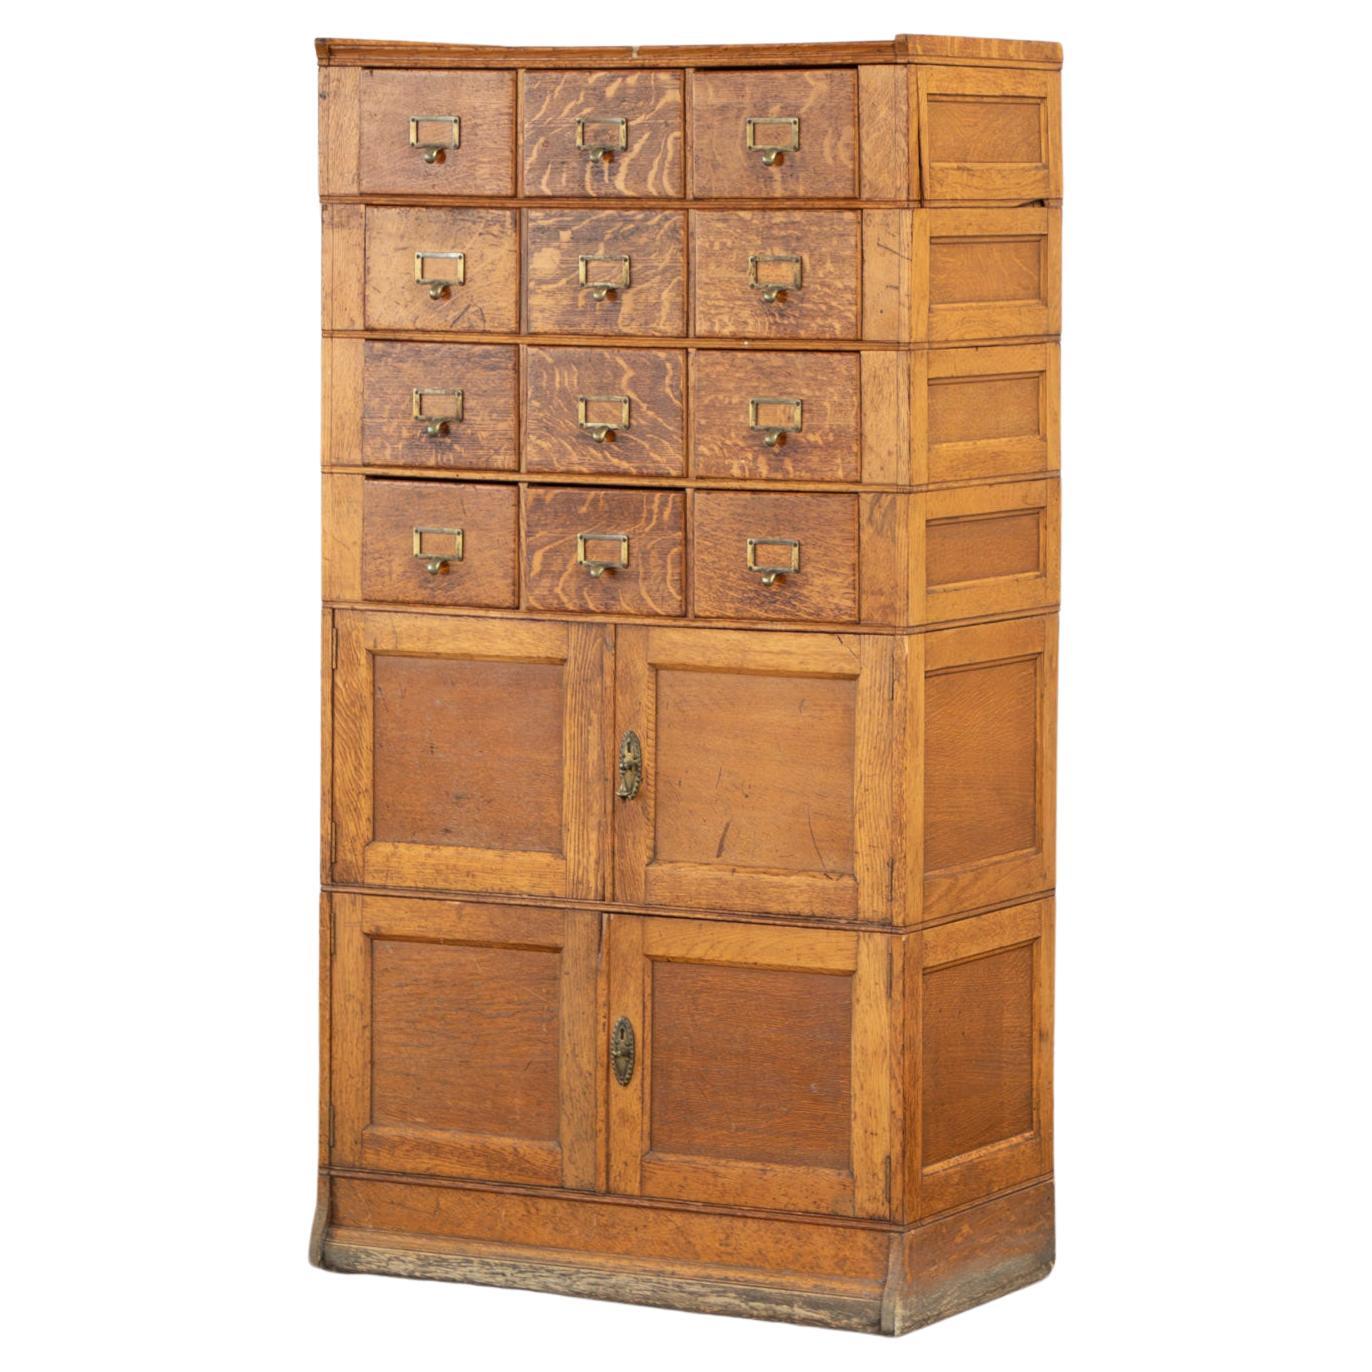 Vintage 1900's oak filling cabinet, haberdashery, apothecary drawers For Sale